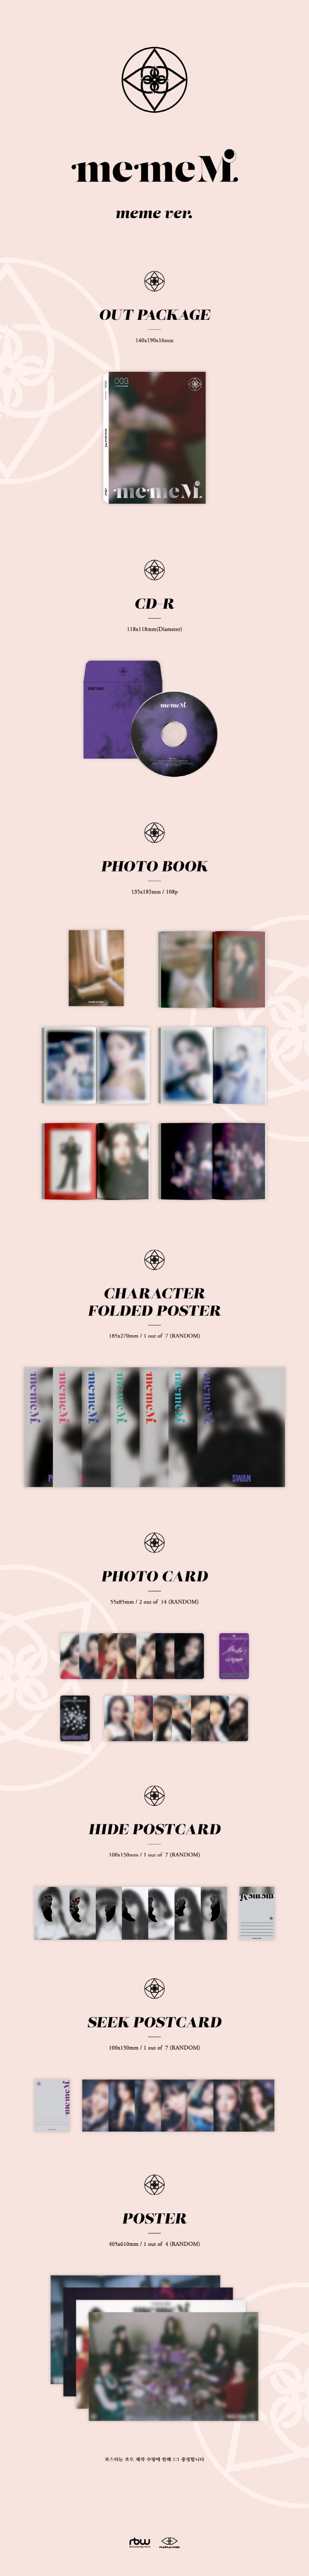 1 CD
1 Photo Book (108 pages)
1 Character Folded Poster (random out of 7 types)
2 Photo Cards (random out of 14 types)
1 H...